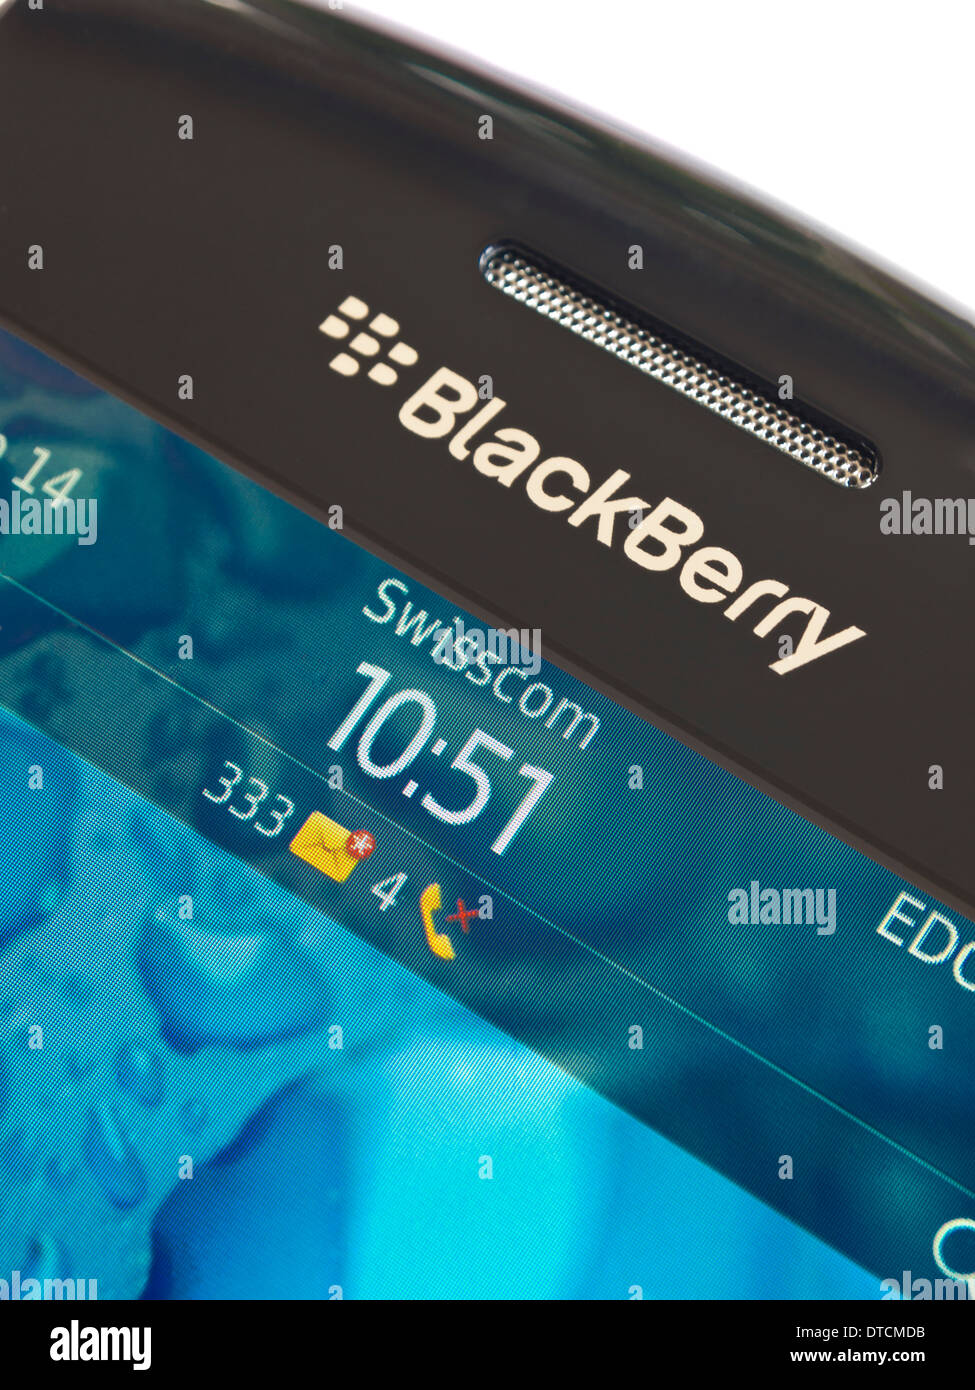 Zurich, Switzerland - September 9, 2012: a Blackberry smartphone showing 4 missed calls and 332 emails Stock Photo